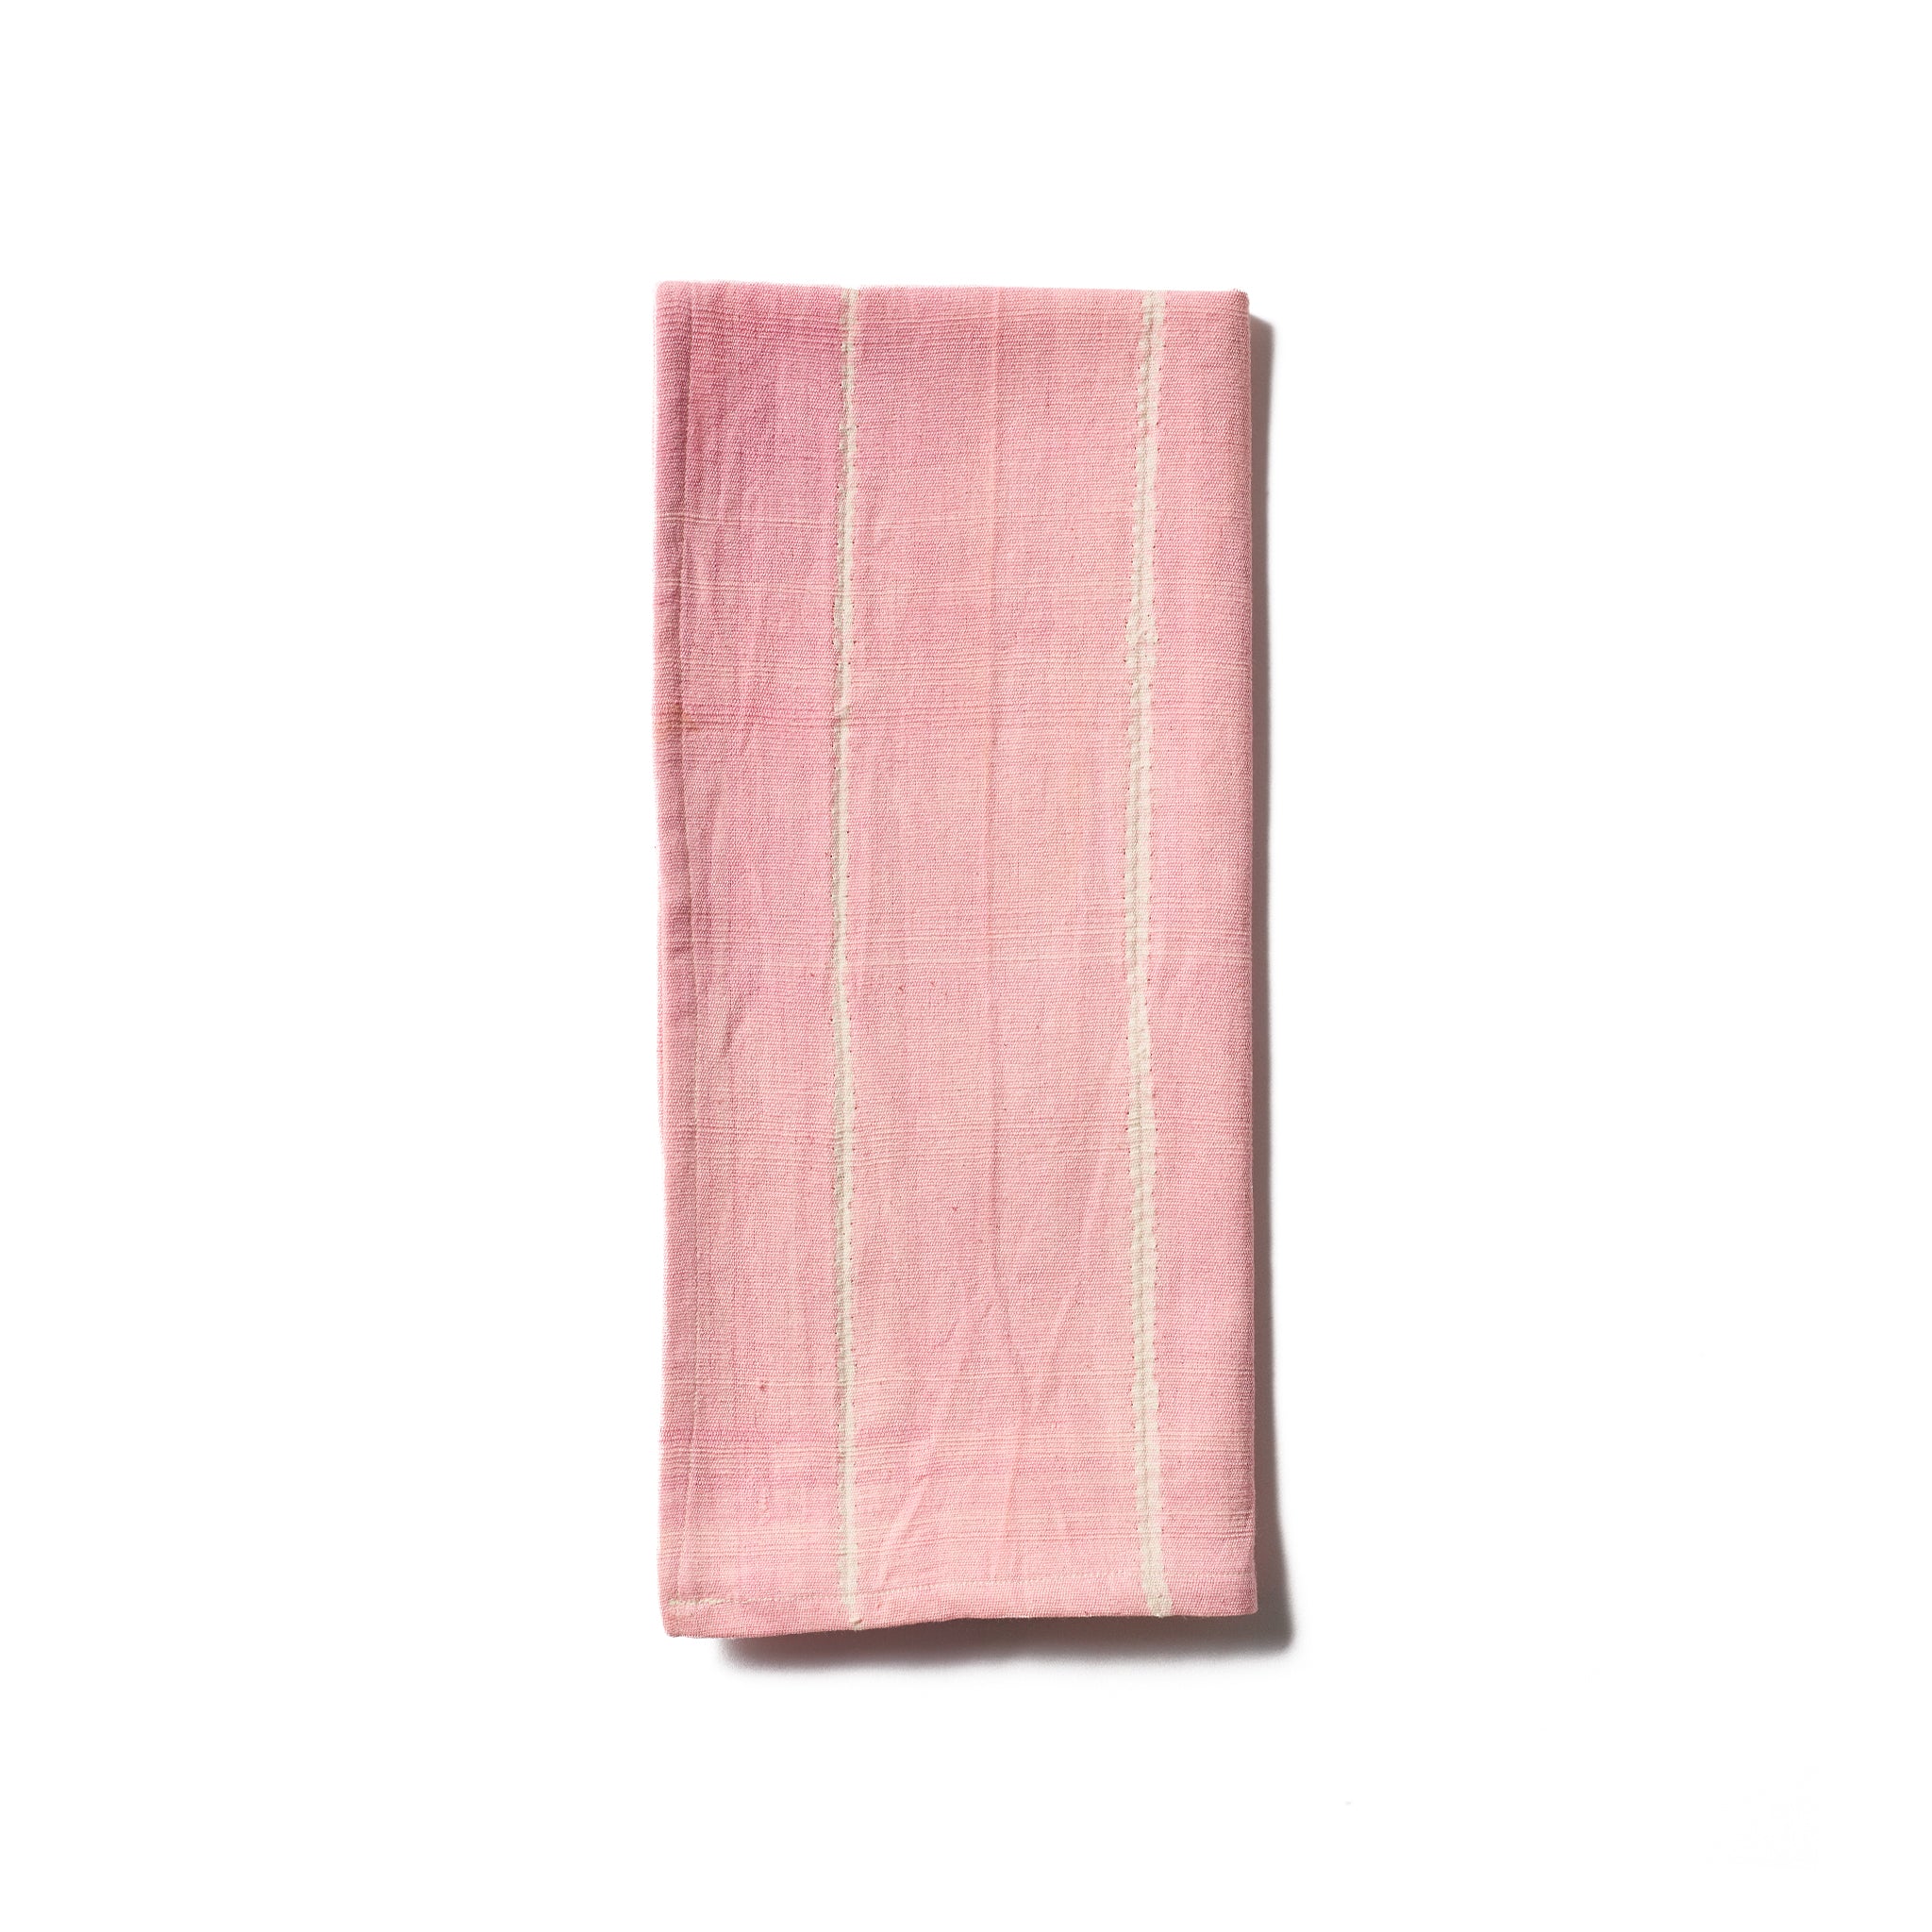 Update your kitchen with this chic yet durable and absorbent pink tie-dye kitchen towel, hand-woven from 100% Ethiopian cotton and dyed in small batches.